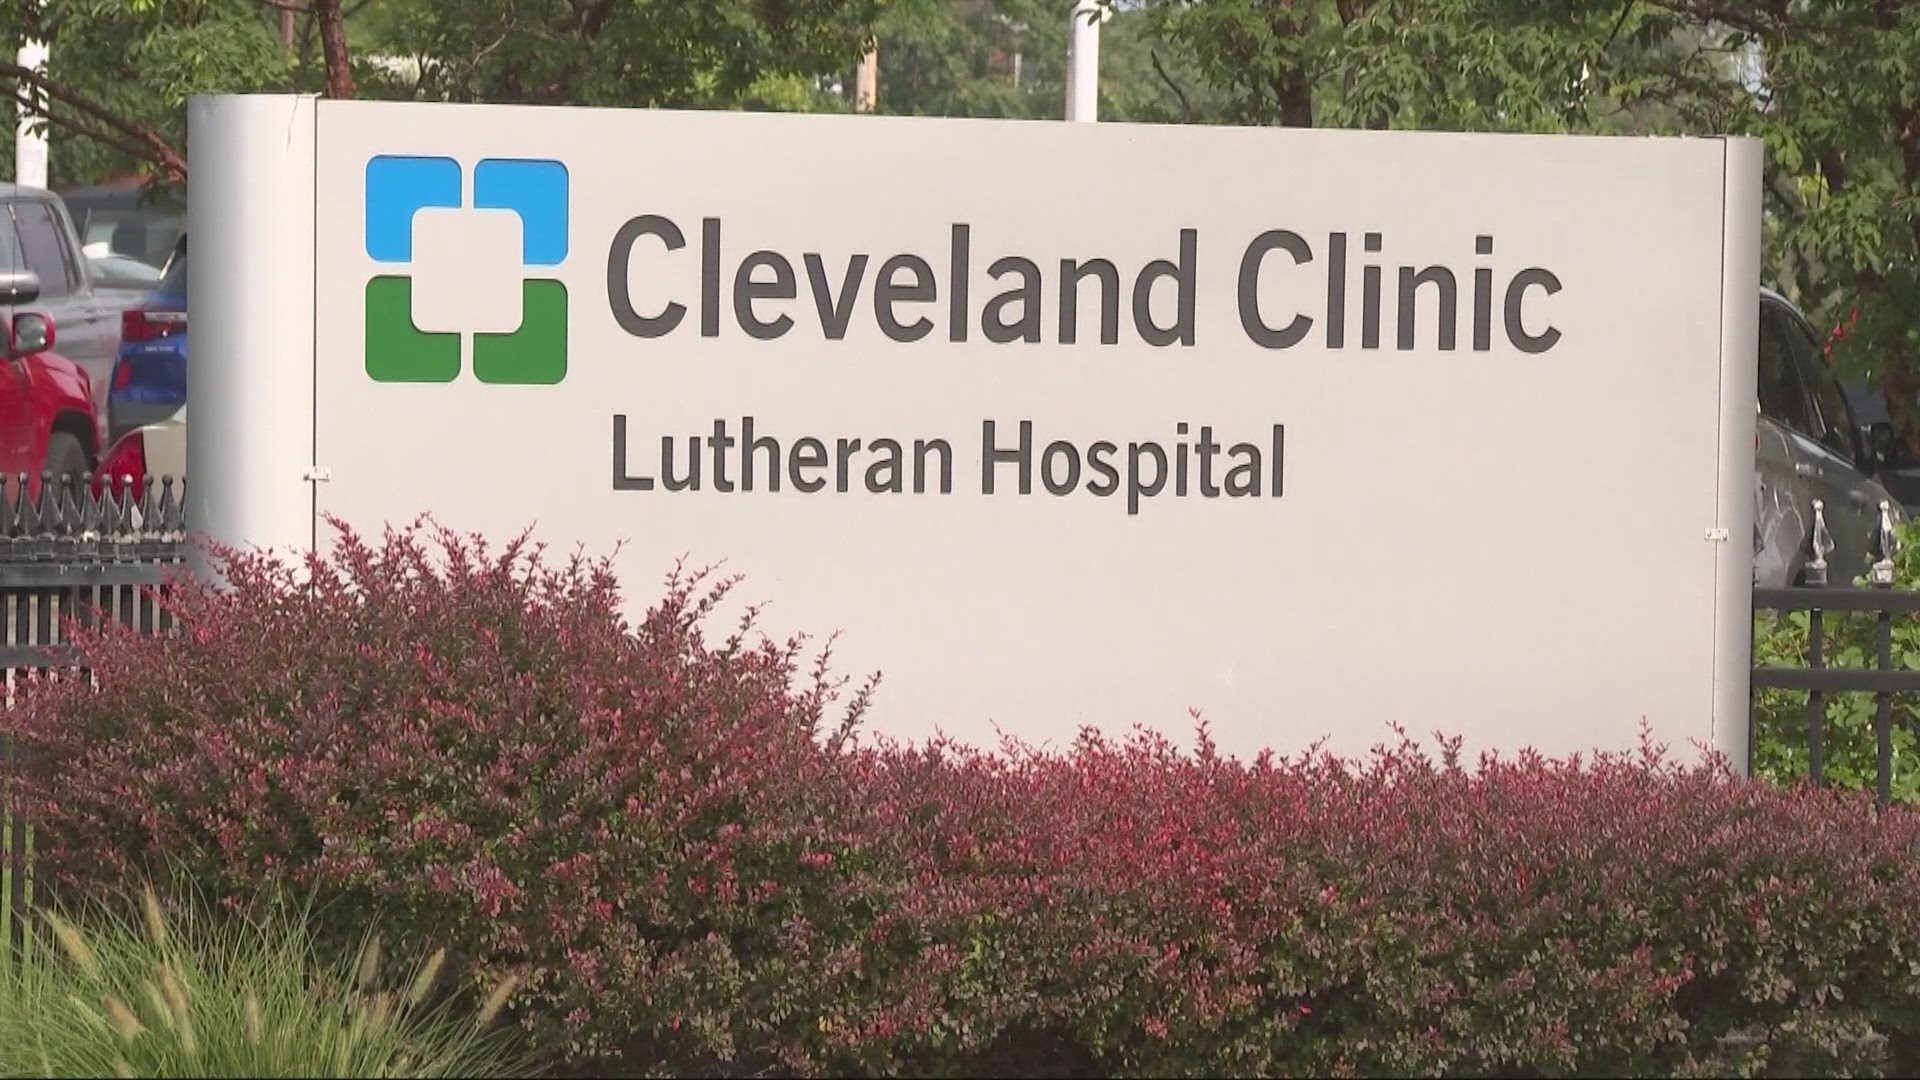 'This is a hospital system that claims to be the best hospital around, yet they treat people like garbage," SEIU 1199's director said of Cleveland Clinic.